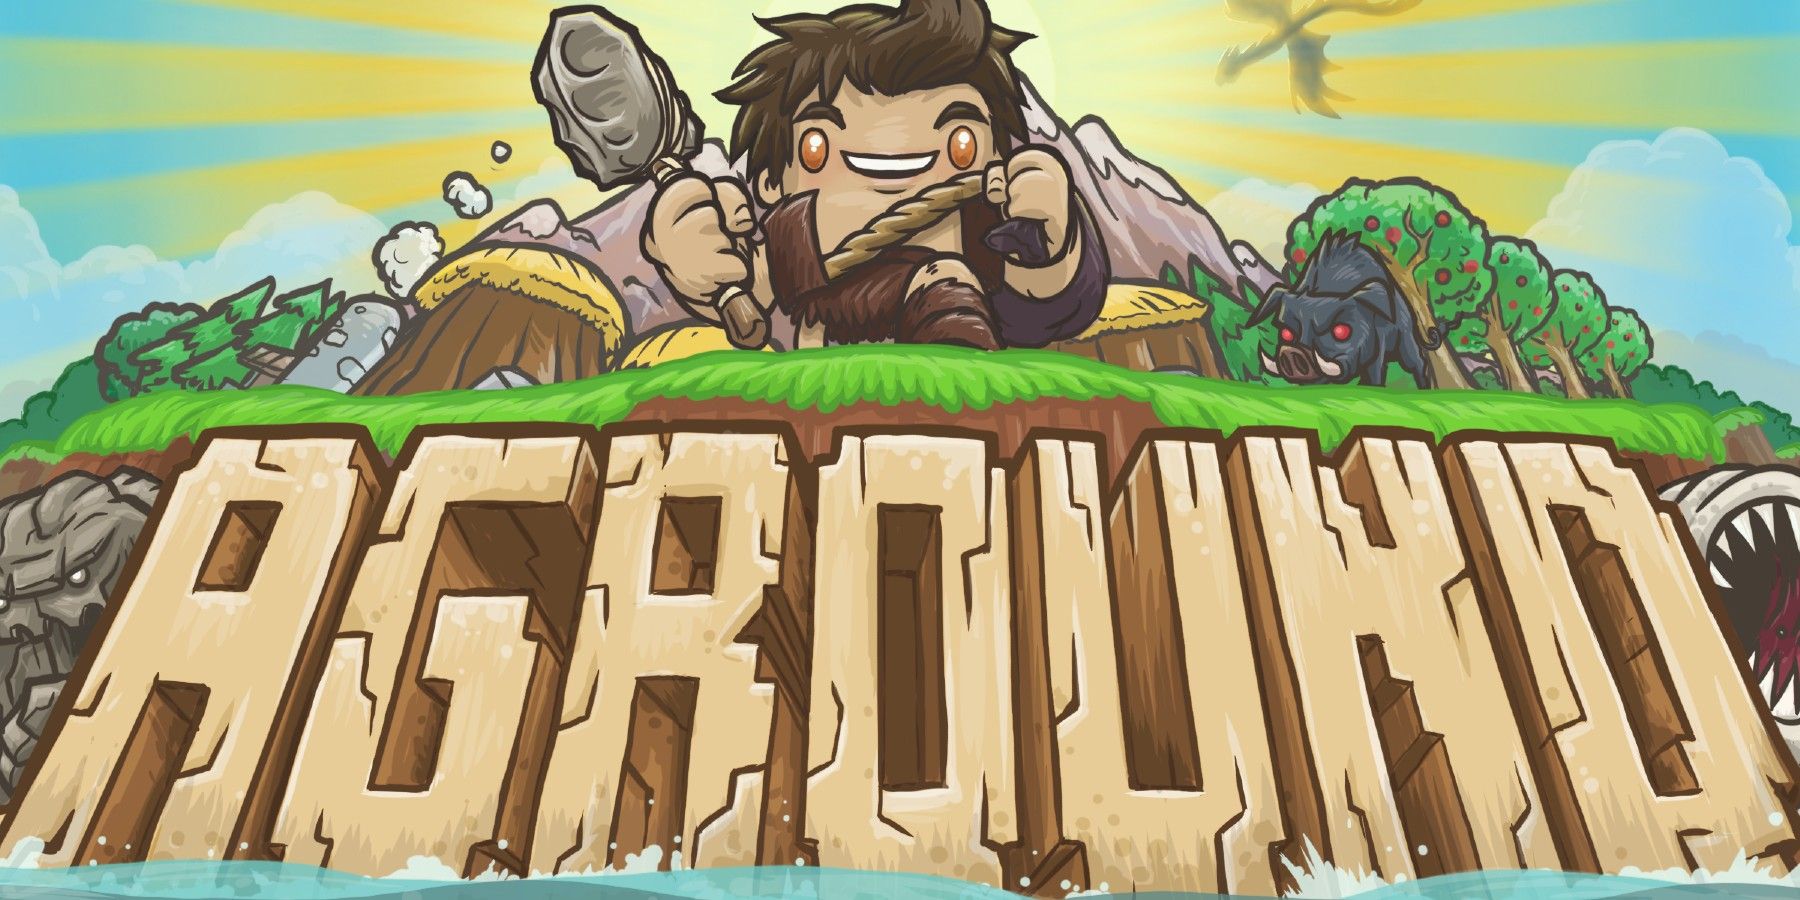 Aground title screen